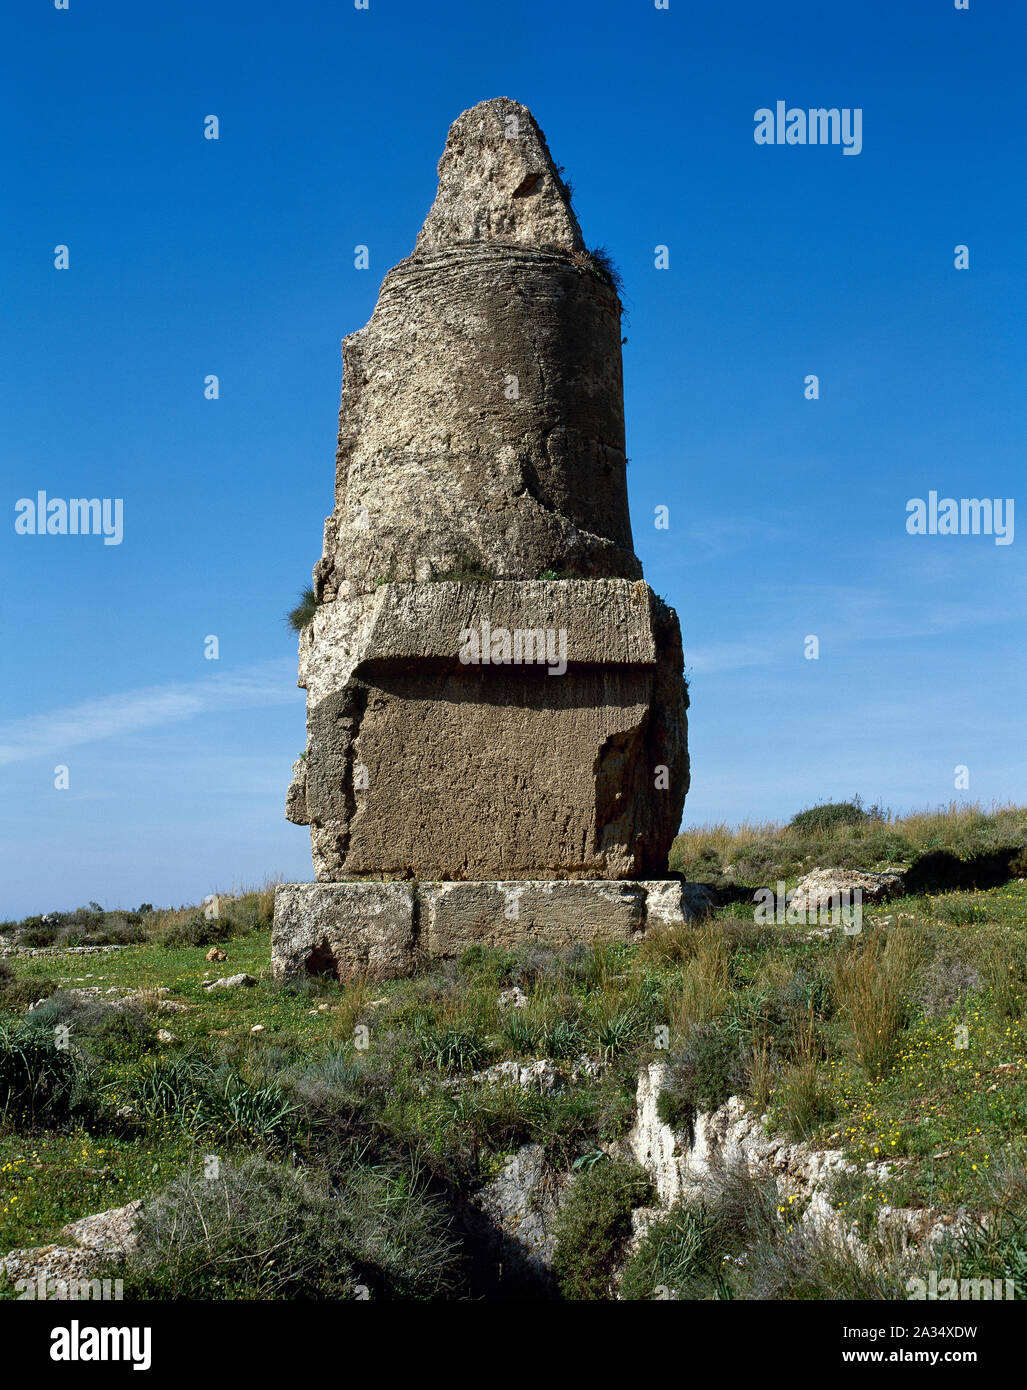 Syria. Amrit or Marathos. Ancient Phoenician city, founded in 3rd millennium BC. Burial towers called 'al Maghazil' or The Spindles. General view of one of the towers. (Photo taken before the Syrian Civil War). Stock Photo